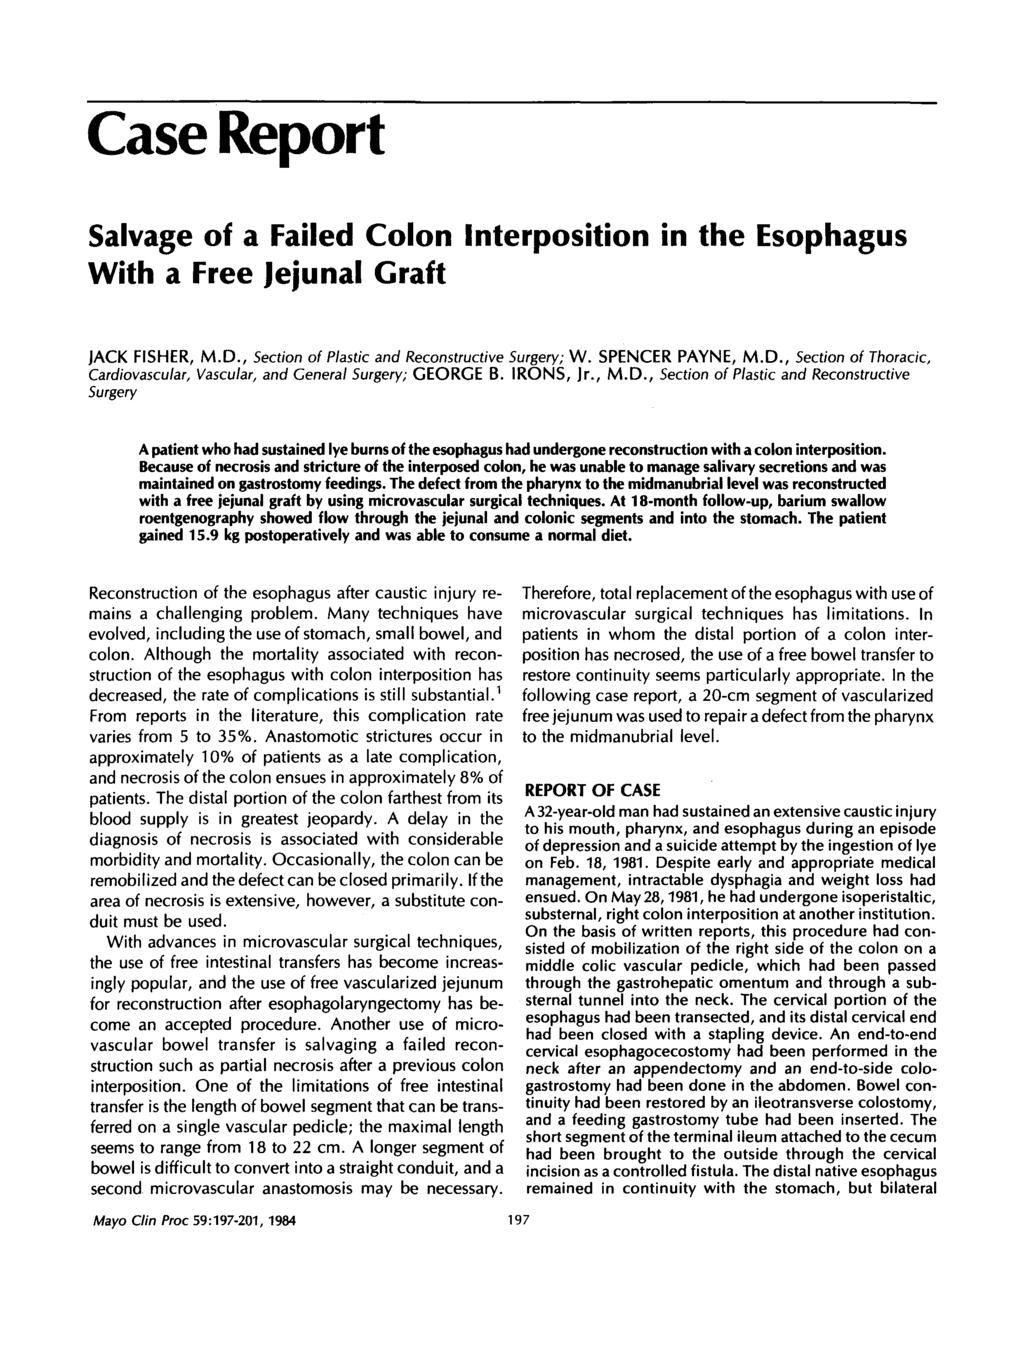 Case Report Salvage of a Failed Colon Interposition in the Esophagus With a Free Jejunal Graft JACK FISHER, M.D., Section of Plastic and Reconstructive Surgery; W. SPENCER PAYNE, M.D., Section of Thoracic, Cardiovascular, Vascular, and General Surgery; GEORGE B.